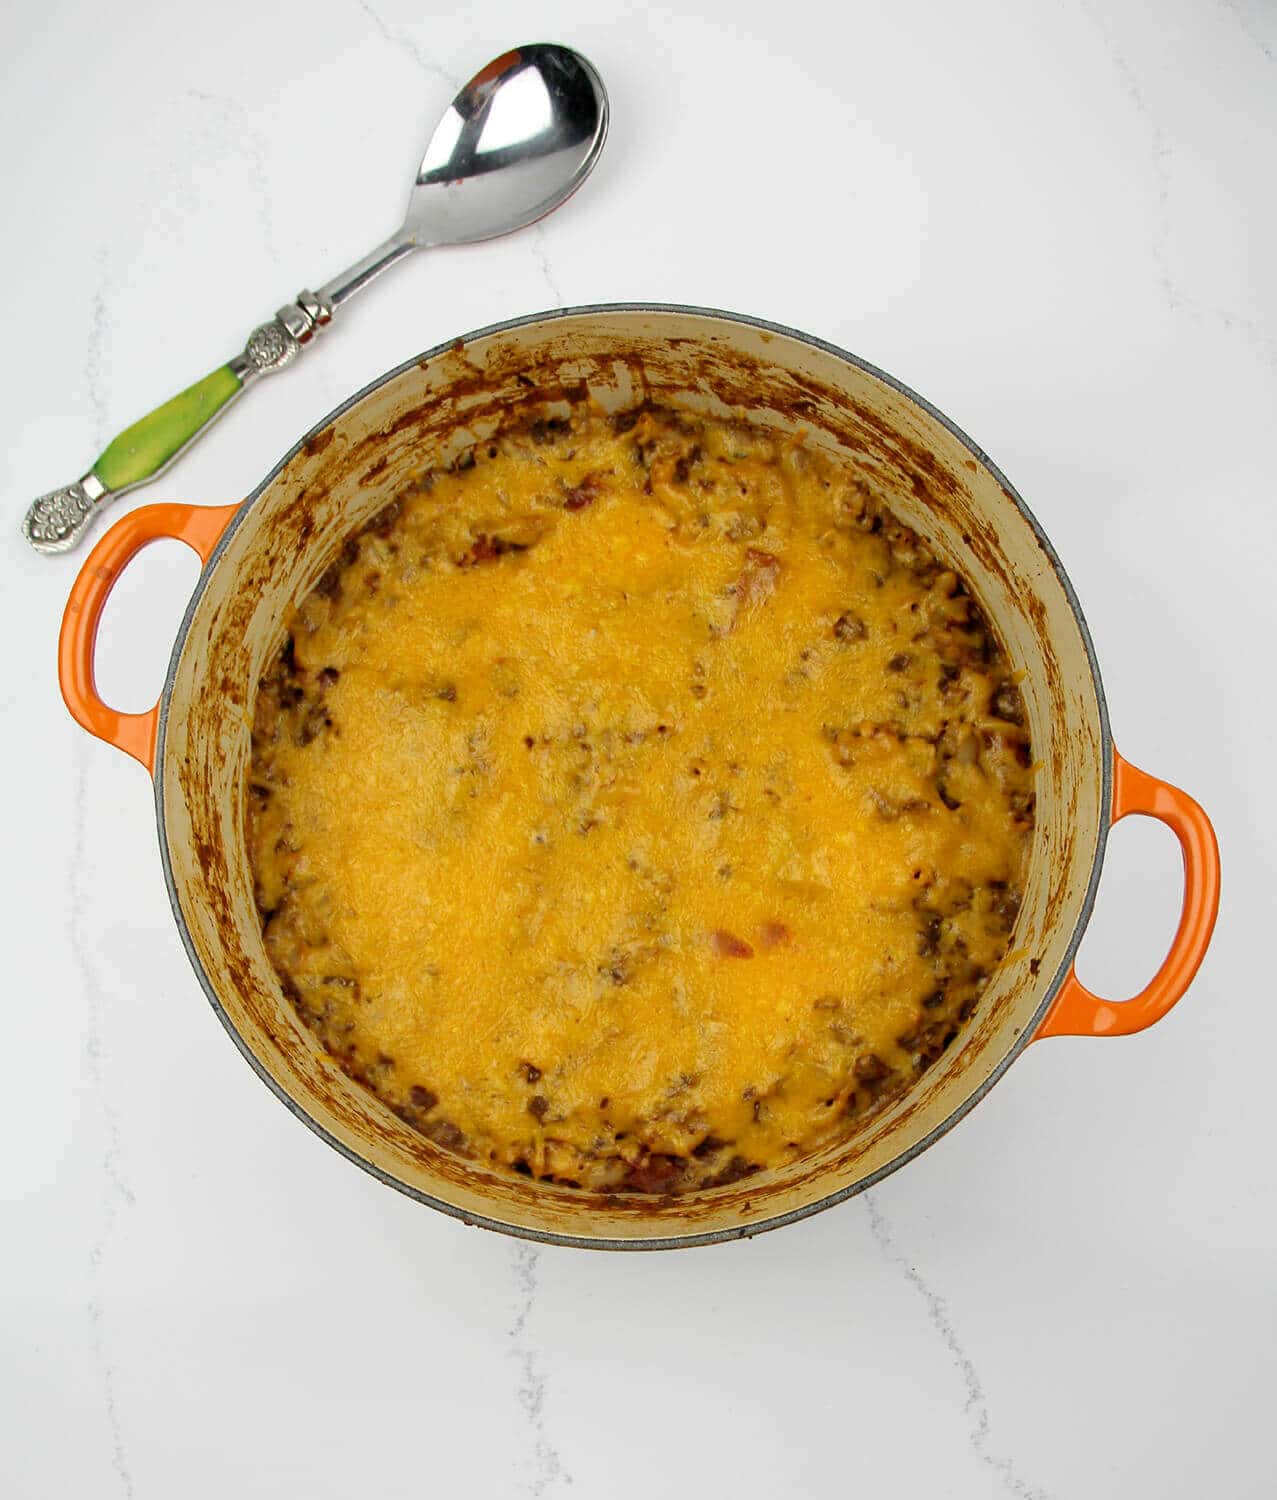 Chili Mac and Cheese is a blend of two beloved comfort foods, chili and macaroni and cheese. Best of all, it's made in one pot so it's easy!